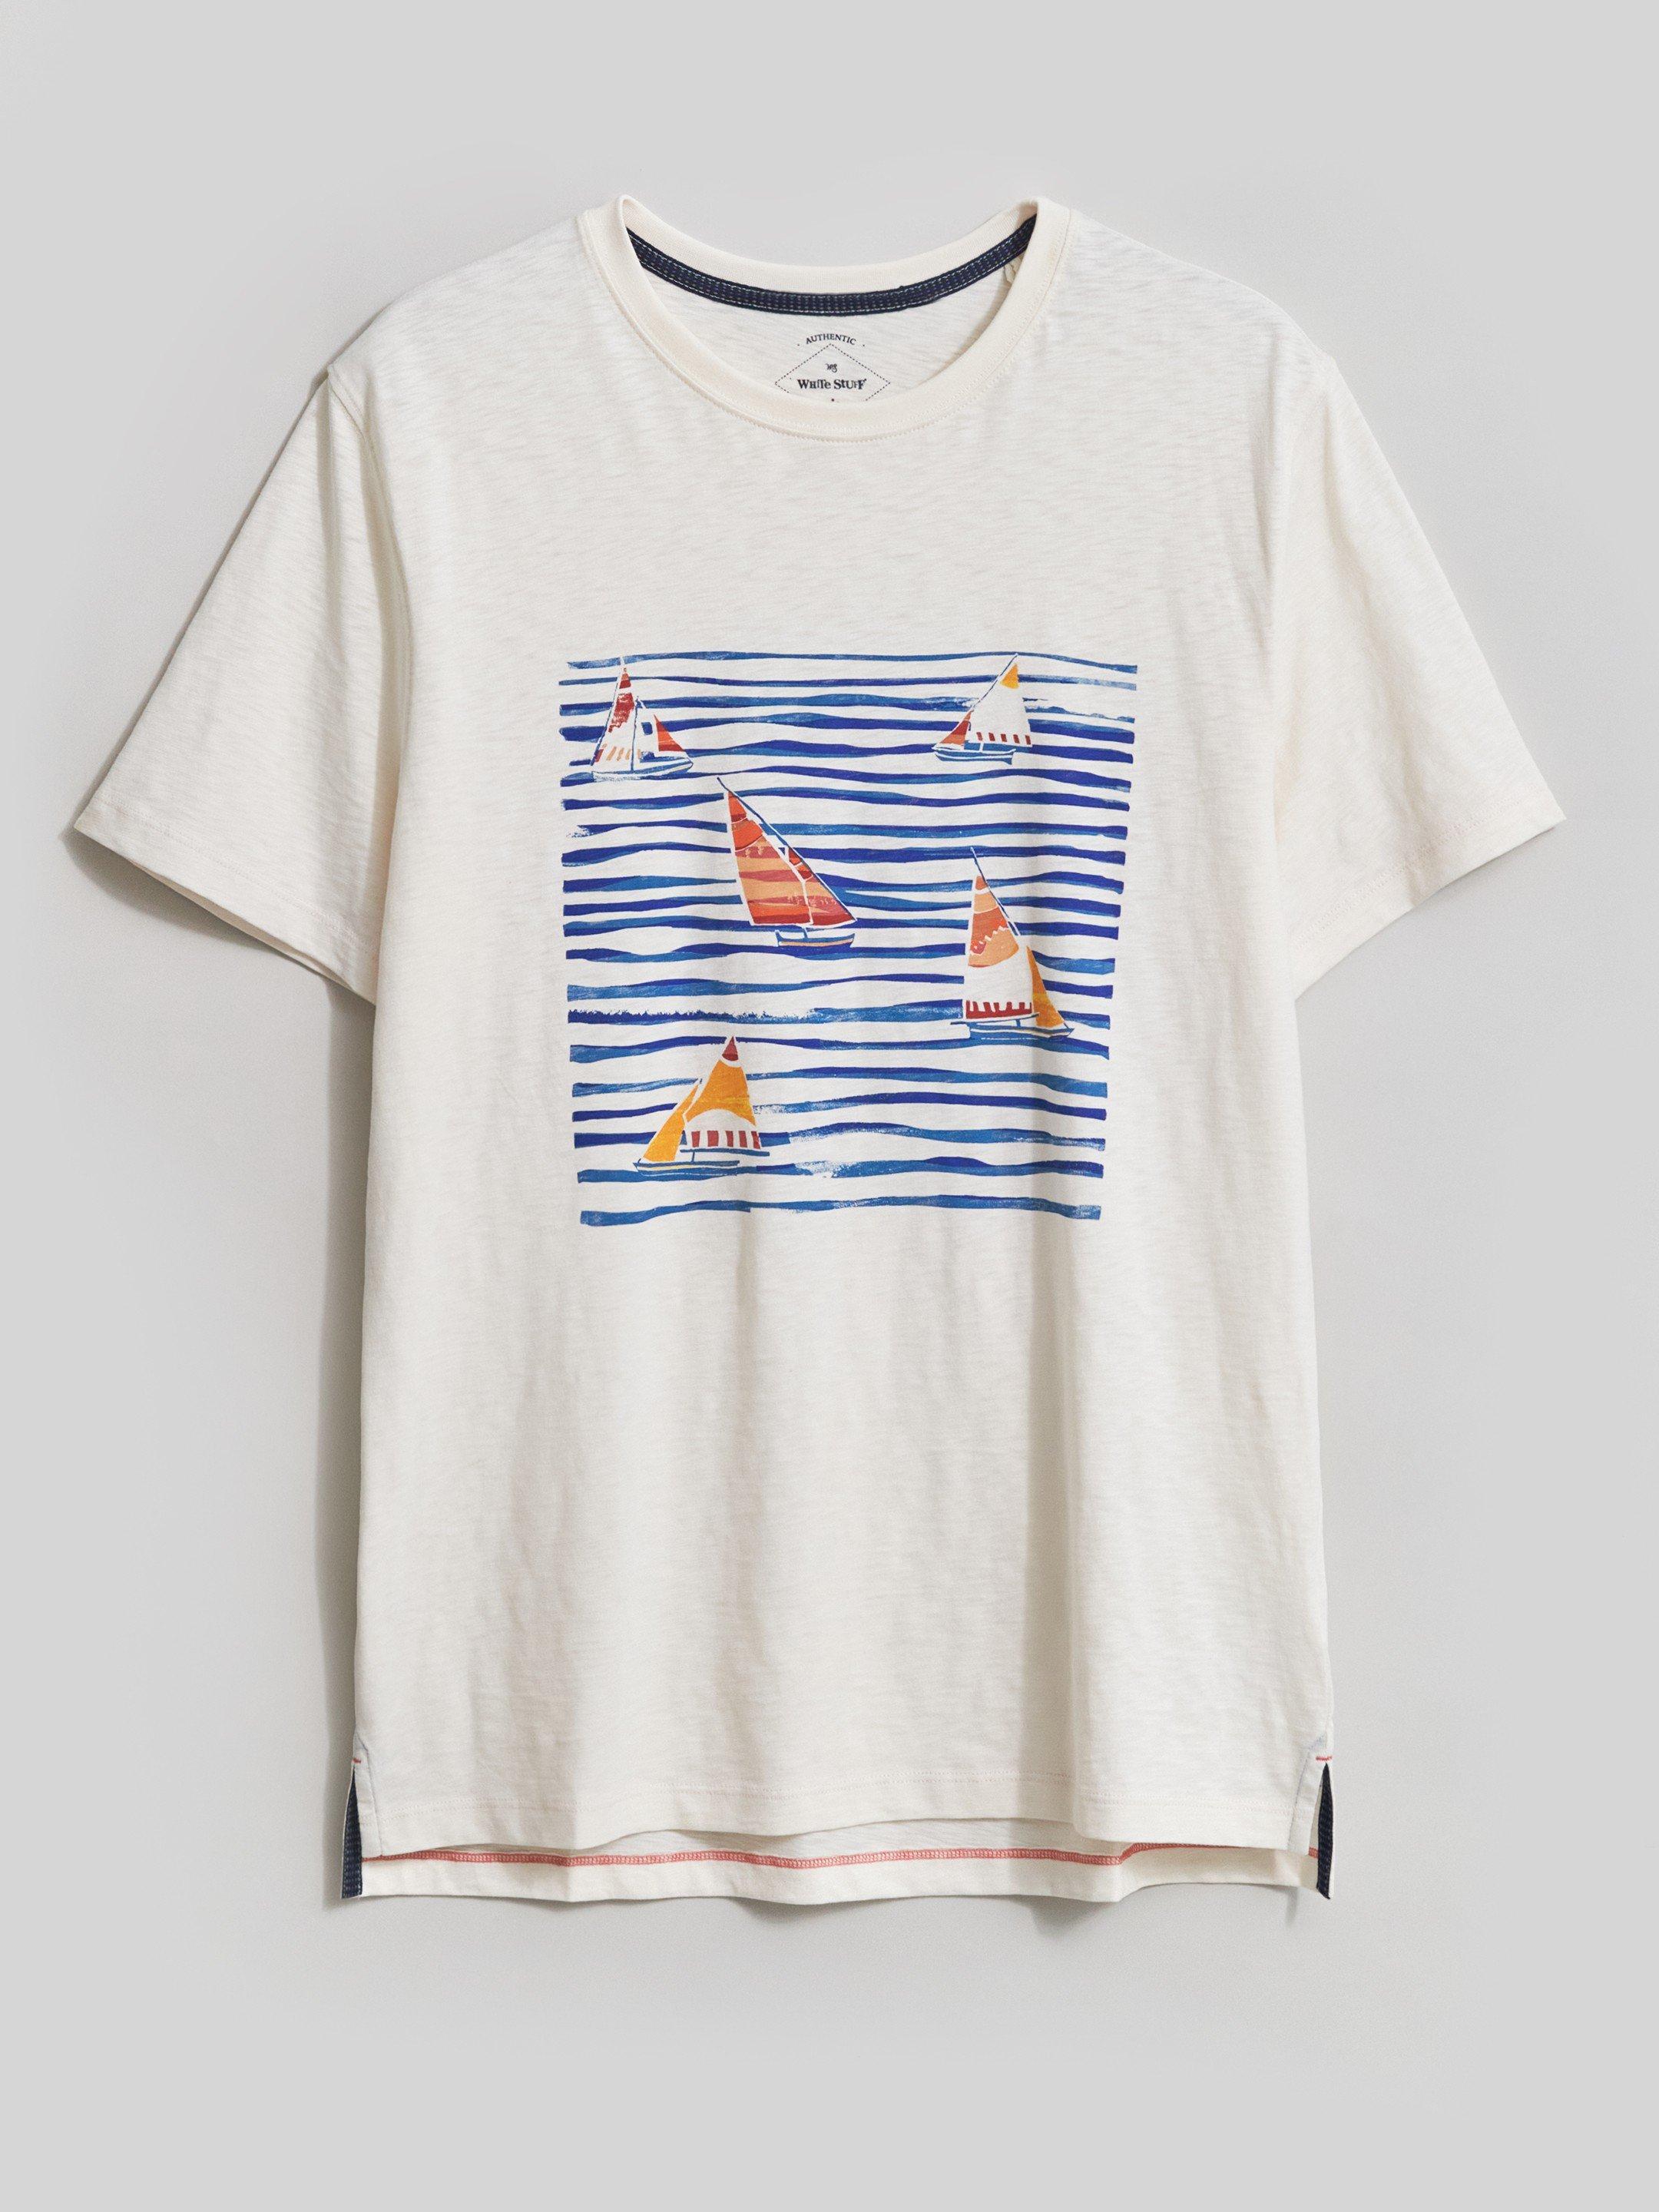 Lagoon Graphic Tshirt in NAT WHITE - FLAT FRONT